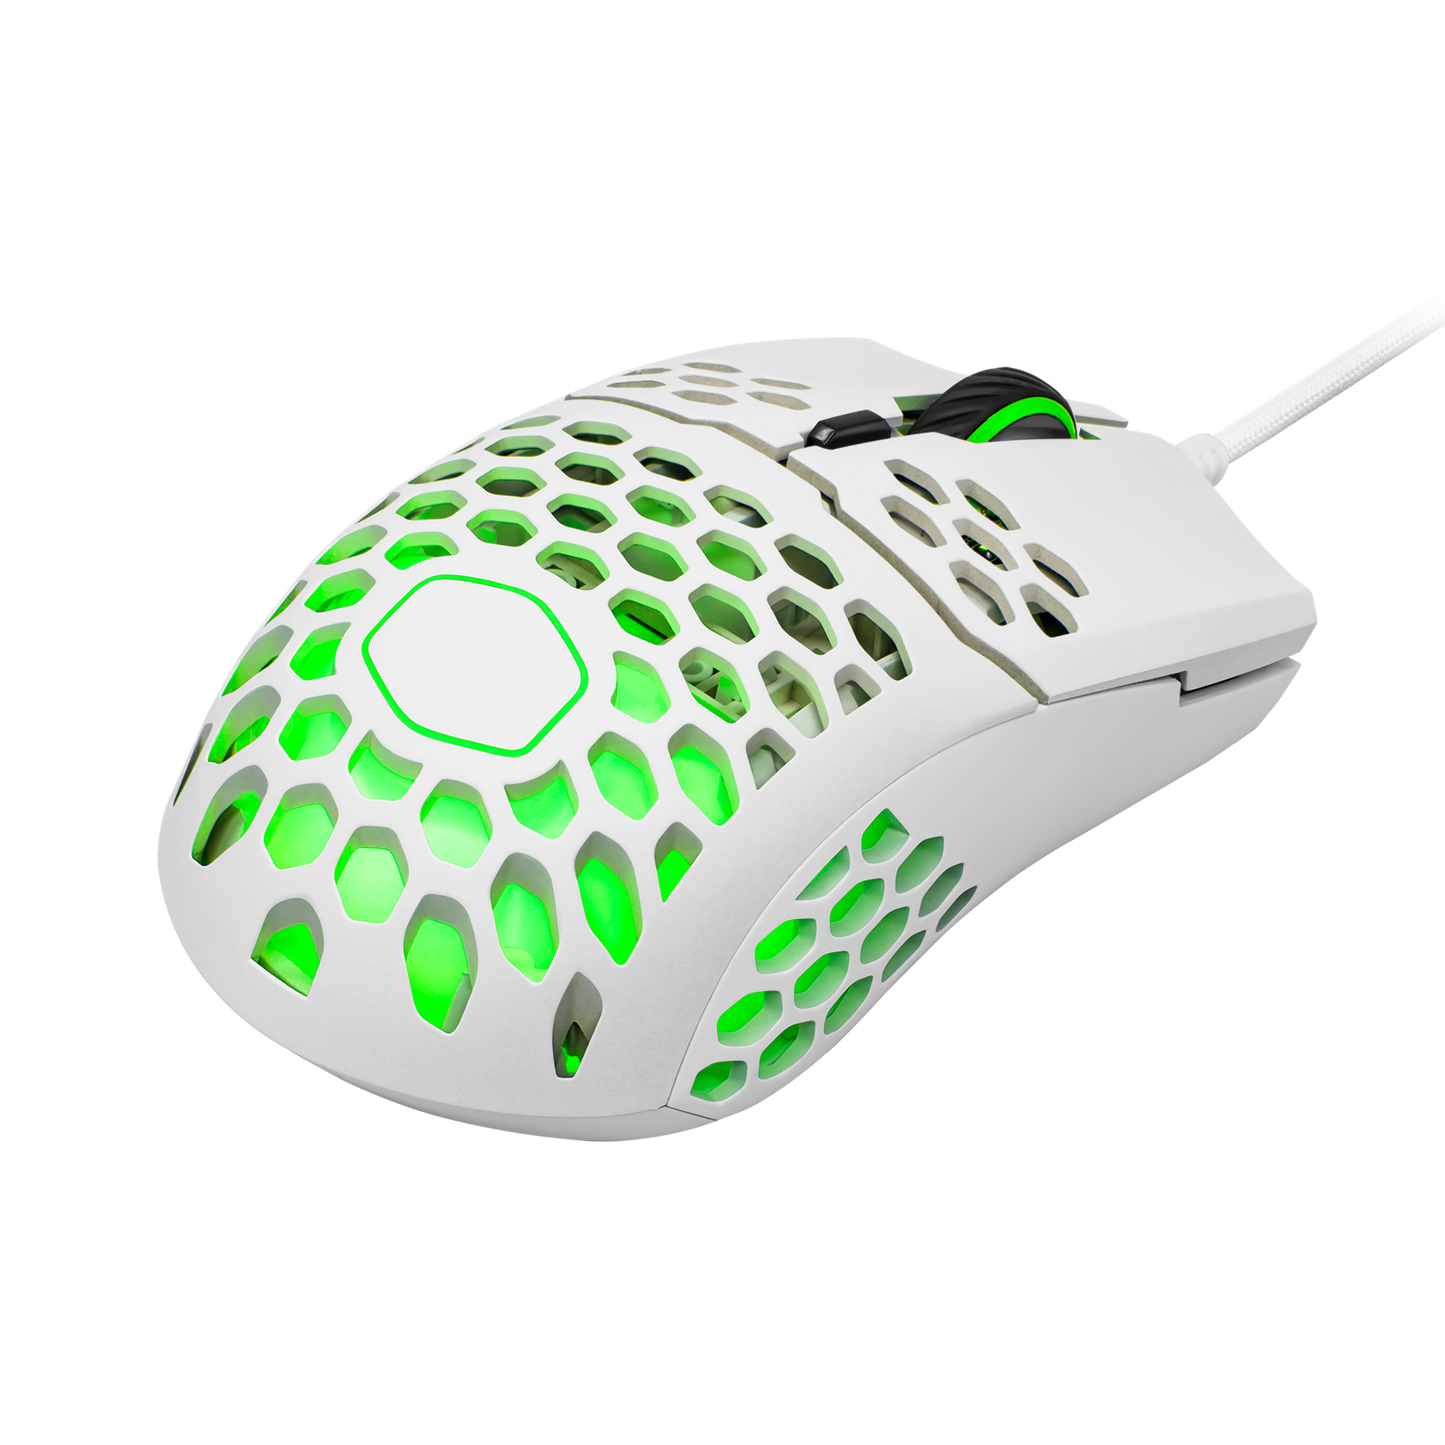 Mouse Cooler Master MM711 Blanco Mate